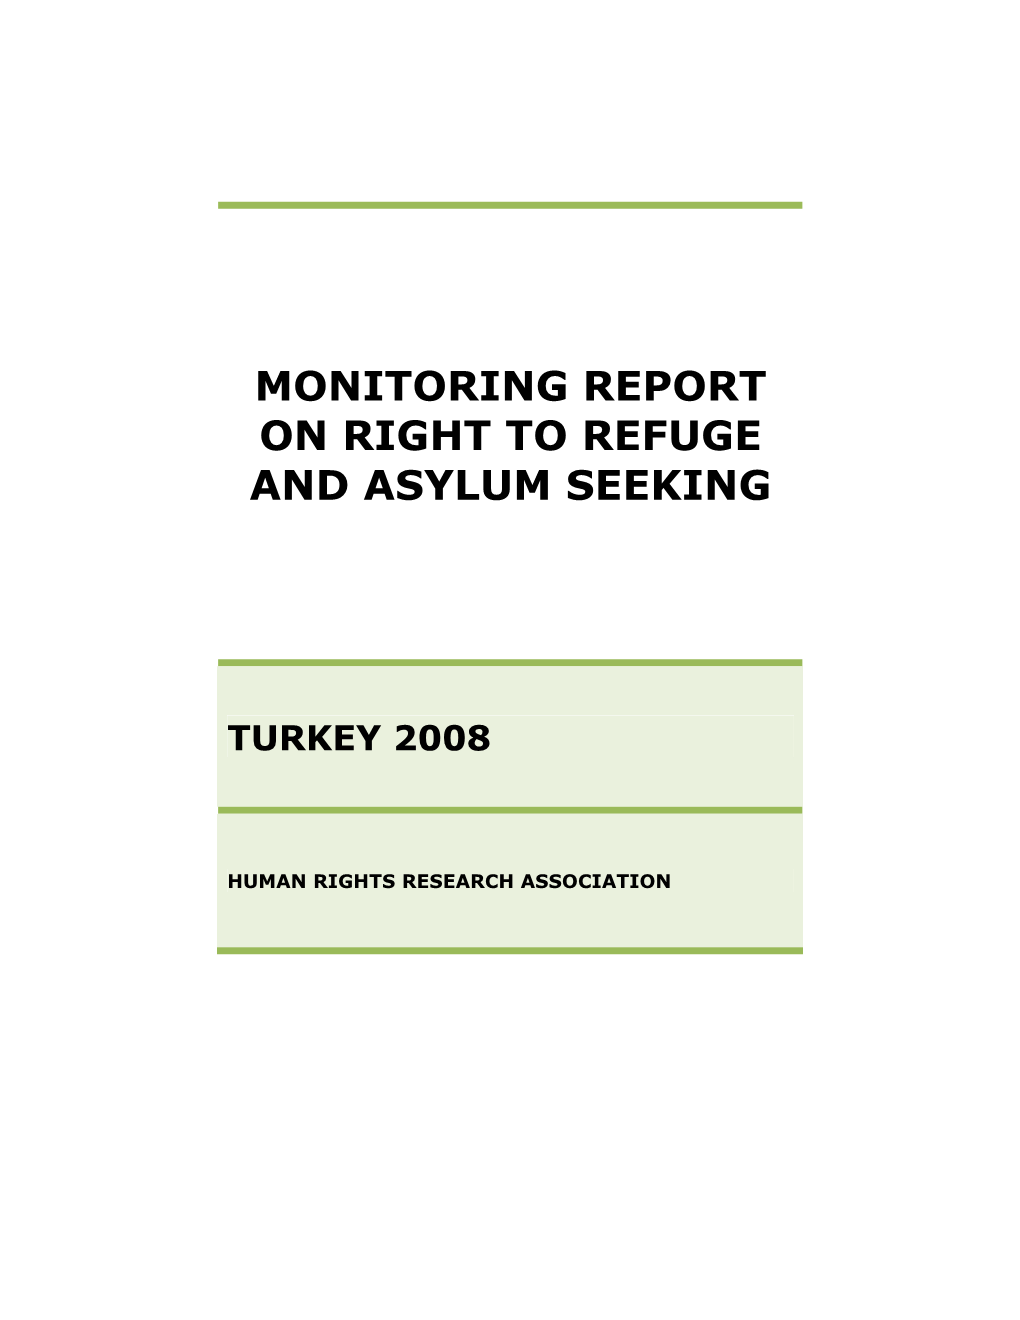 Monitoring Report on Right to Refuge and Asylum Seeking